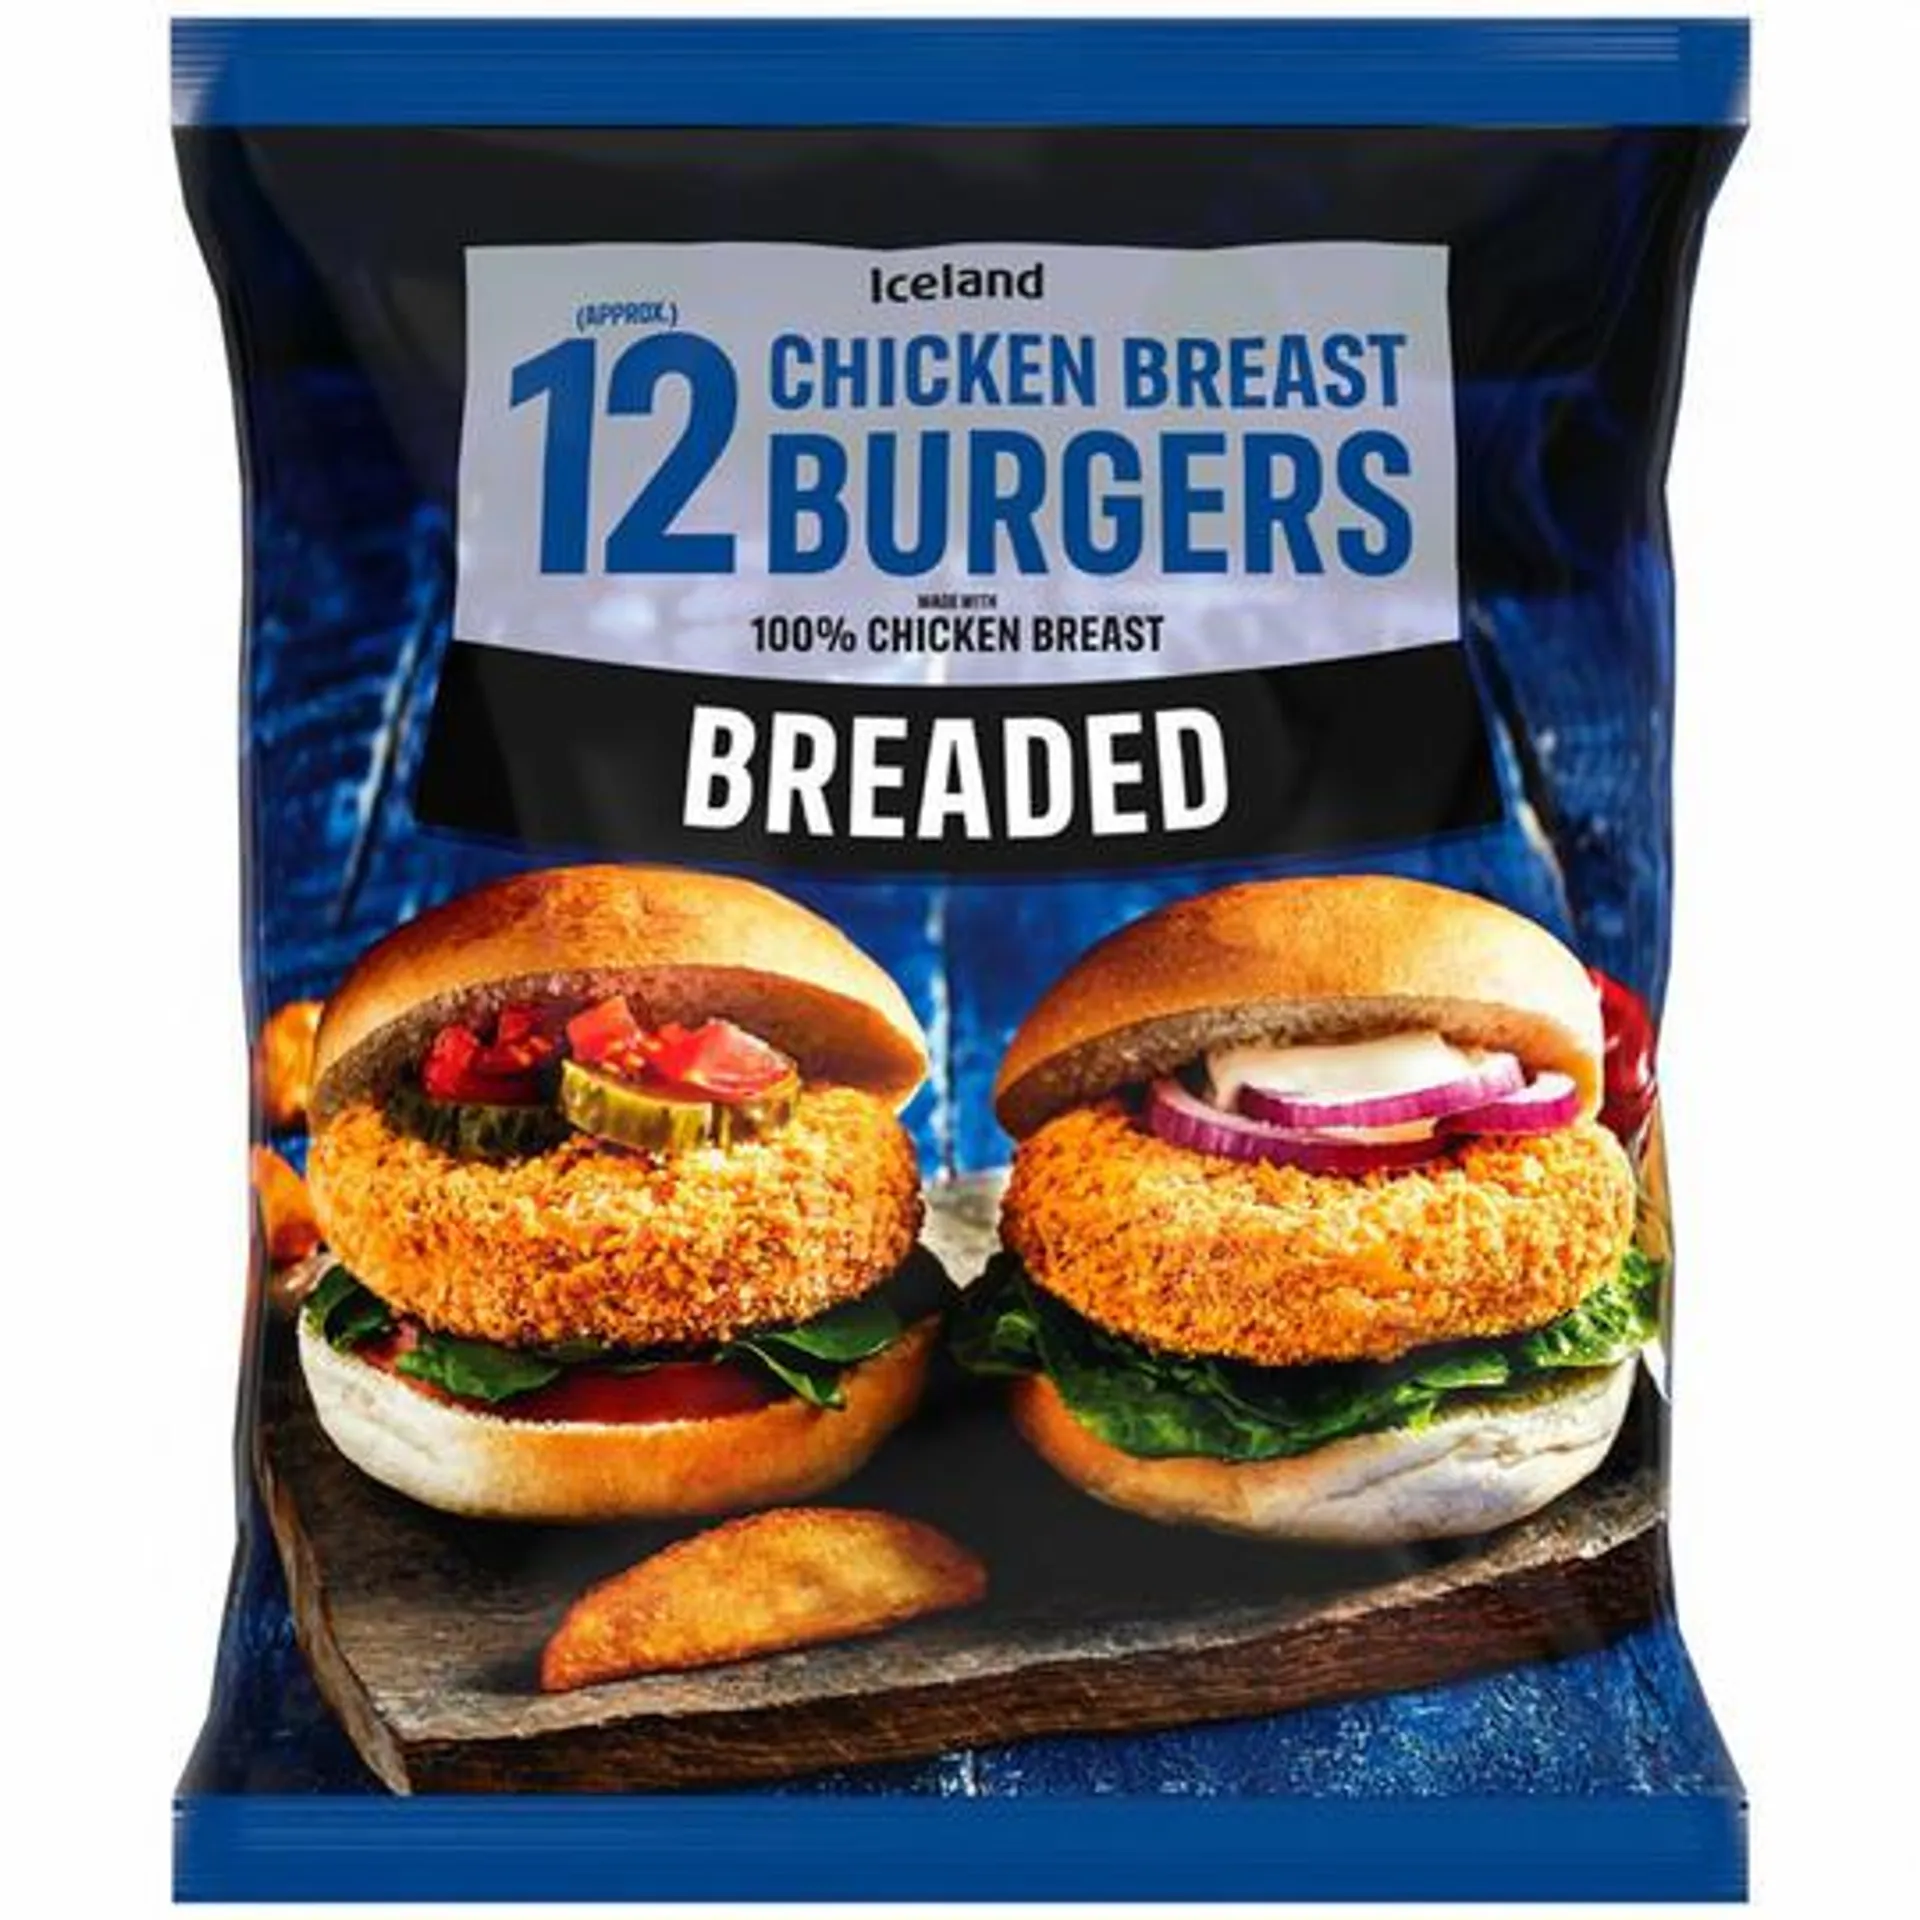 Iceland 12 (approx.) Breaded Chicken Breast Burgers 660g